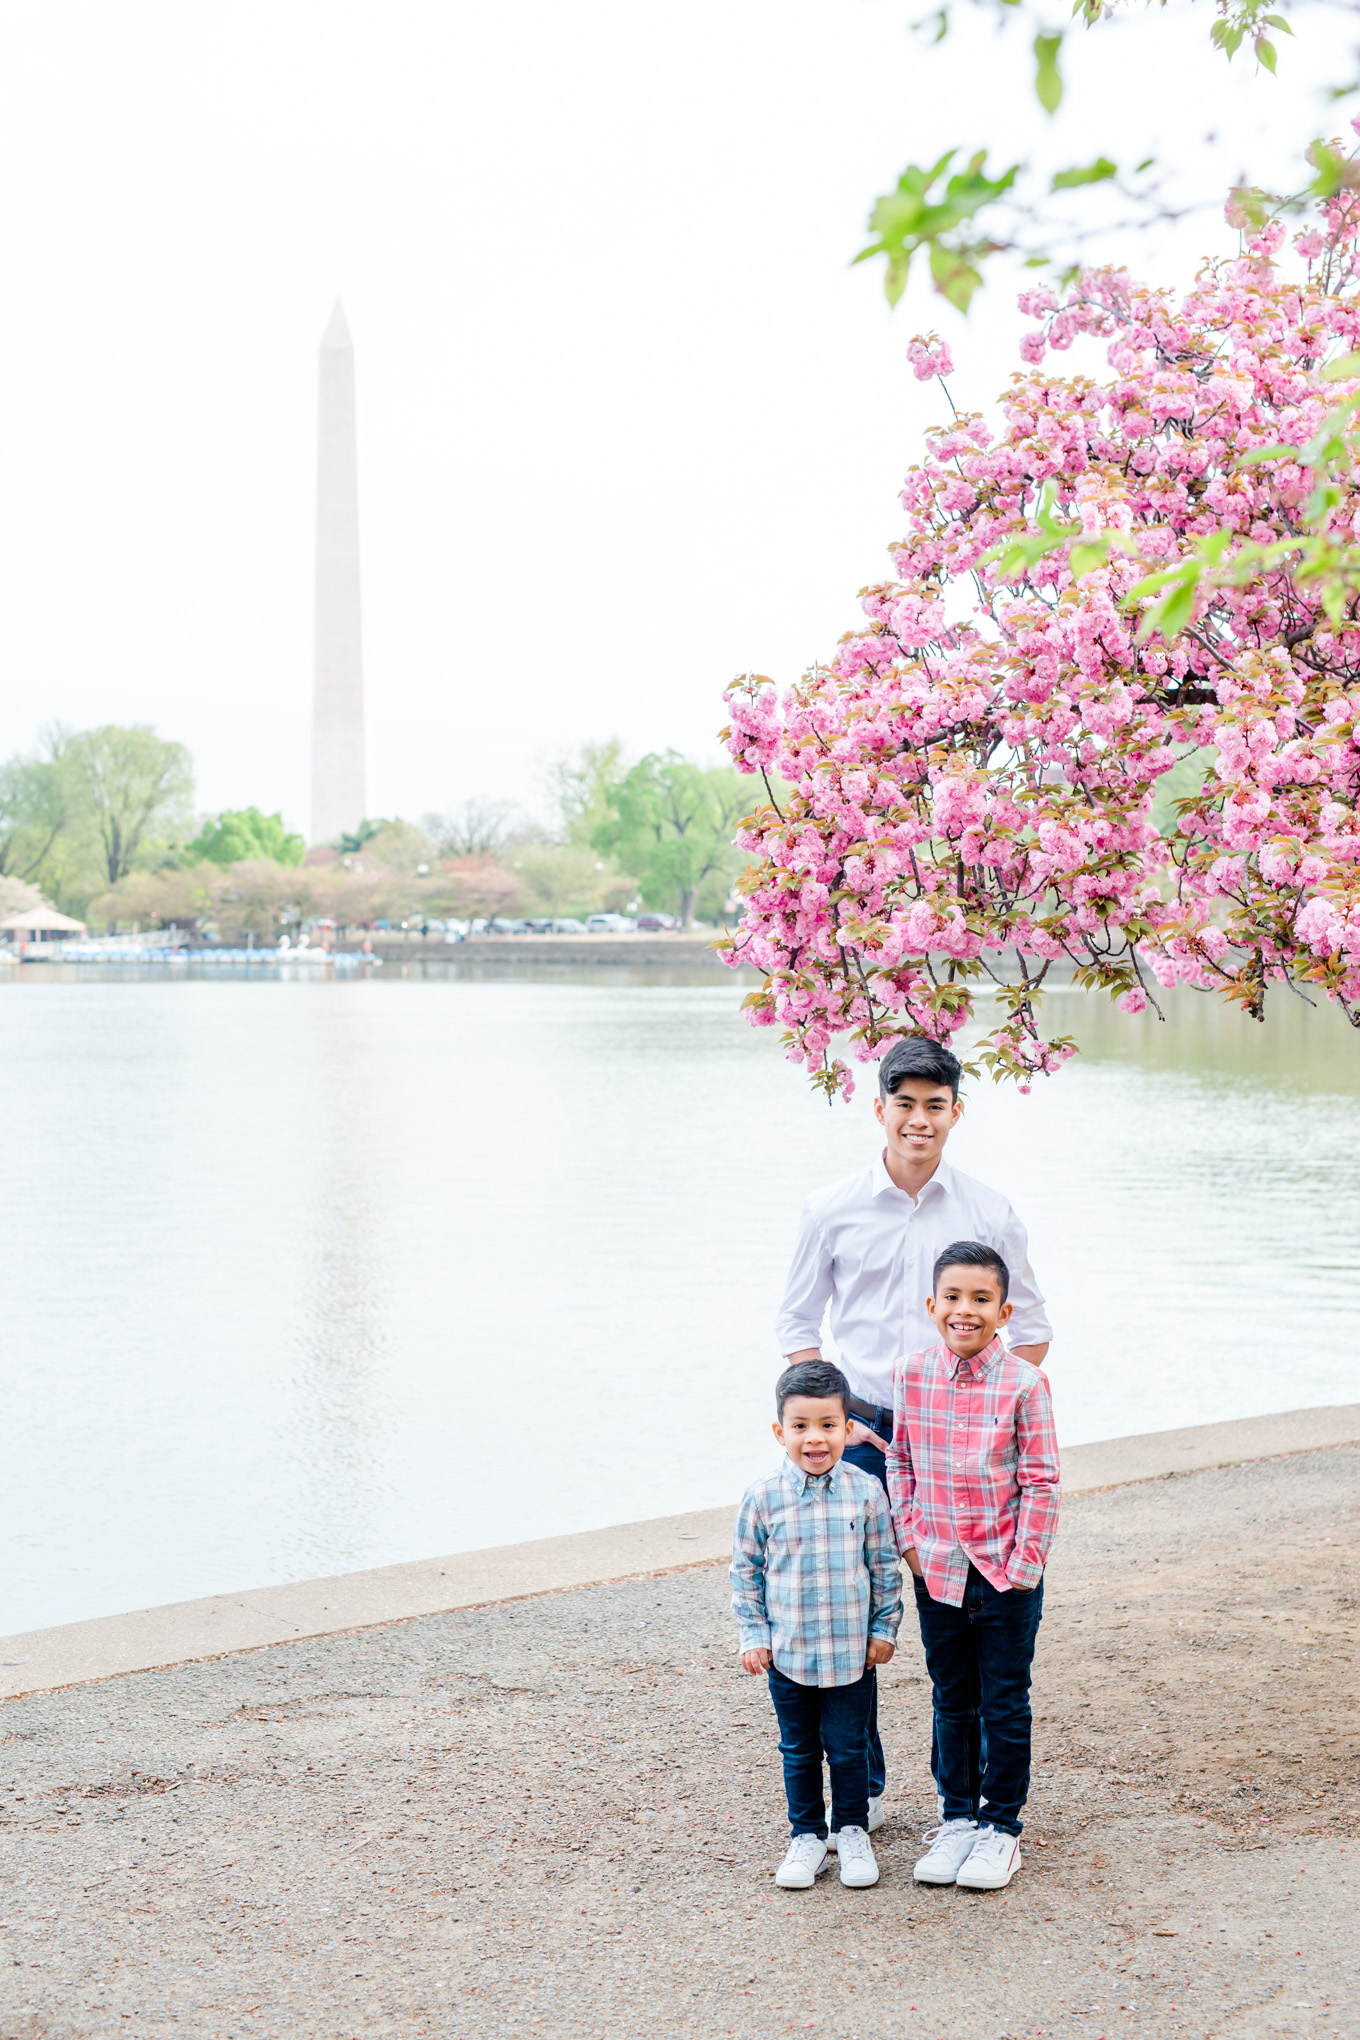 cherry blossoms family photos, D.C. tidal basin, D.C. cherry blossoms maternity photos, D.C. family photos, family photos, spring family photos, family photo ideas, D.C. family portraits, kwanzan cherry blossoms, tidal basin family photos, D.C. photographer, Rachel E.H. Photography, cherry blossoms, family photos style, three brothers, siblings photos